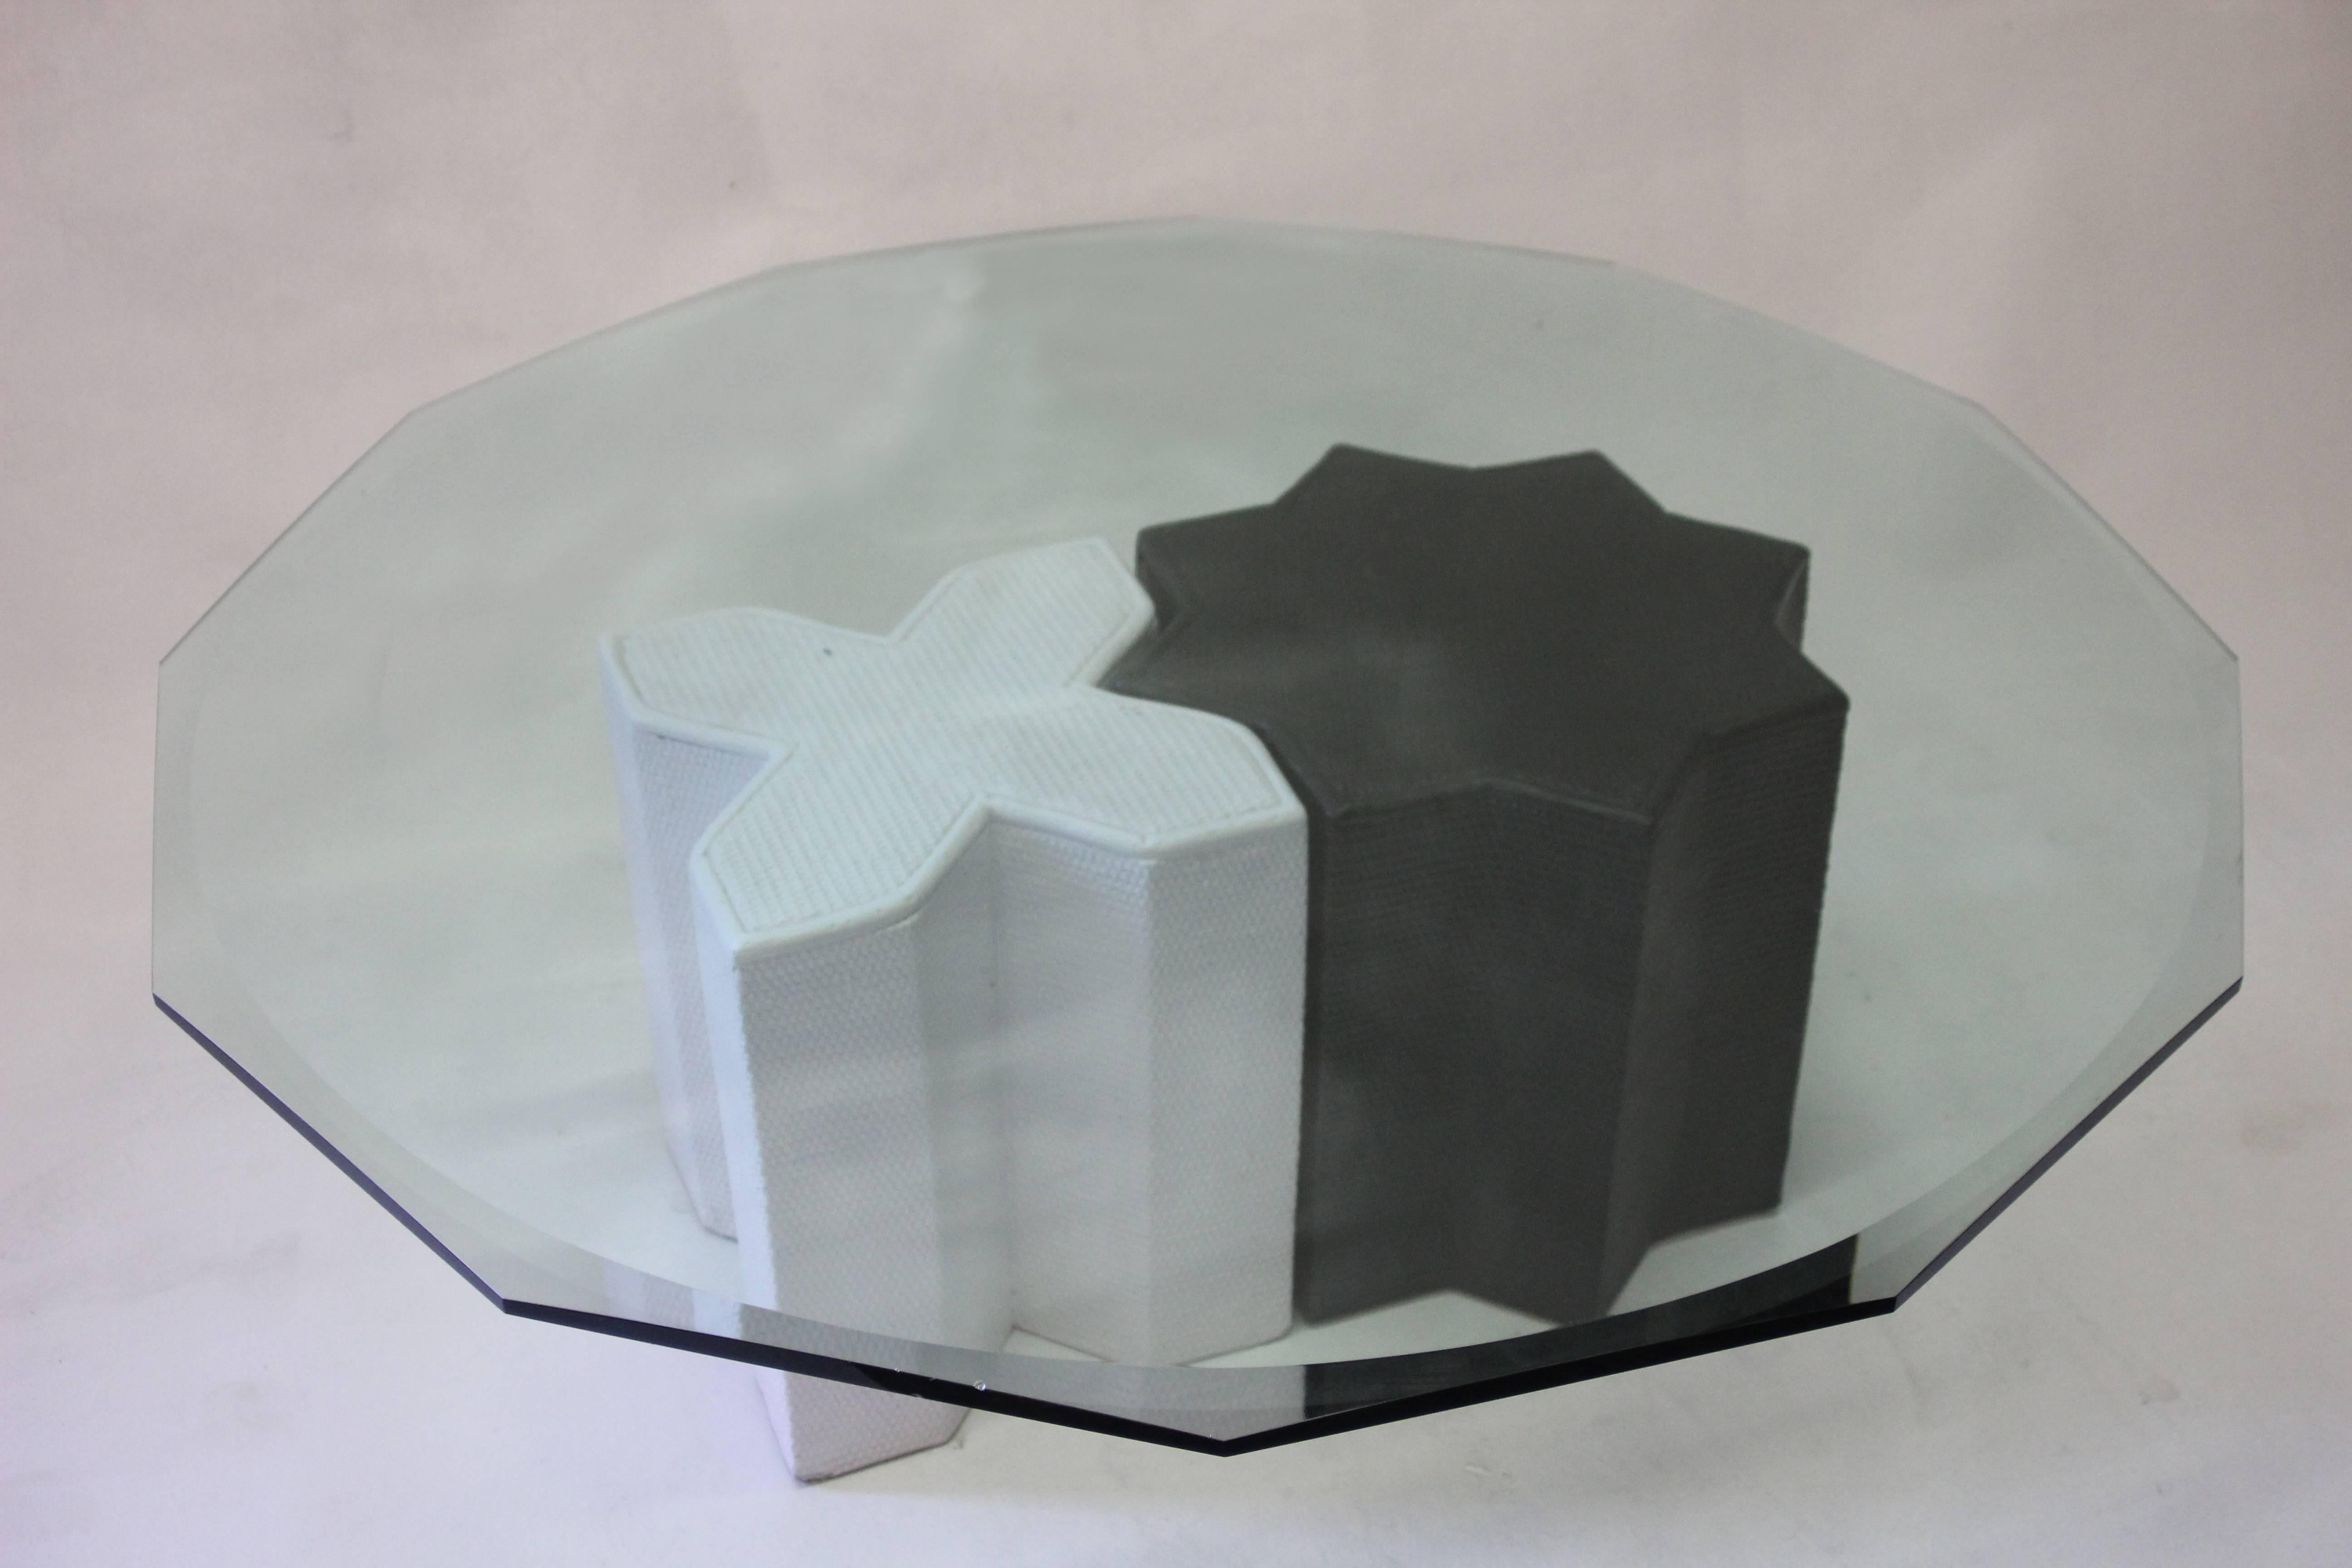 Beveled glass top coffee table has geometrically shaped edges. Base consists of two pieces that perfectly fit together or can be spaced apart as well as used as bases for side tables or small pedestals. Base parts newly repainted. Glass in very good